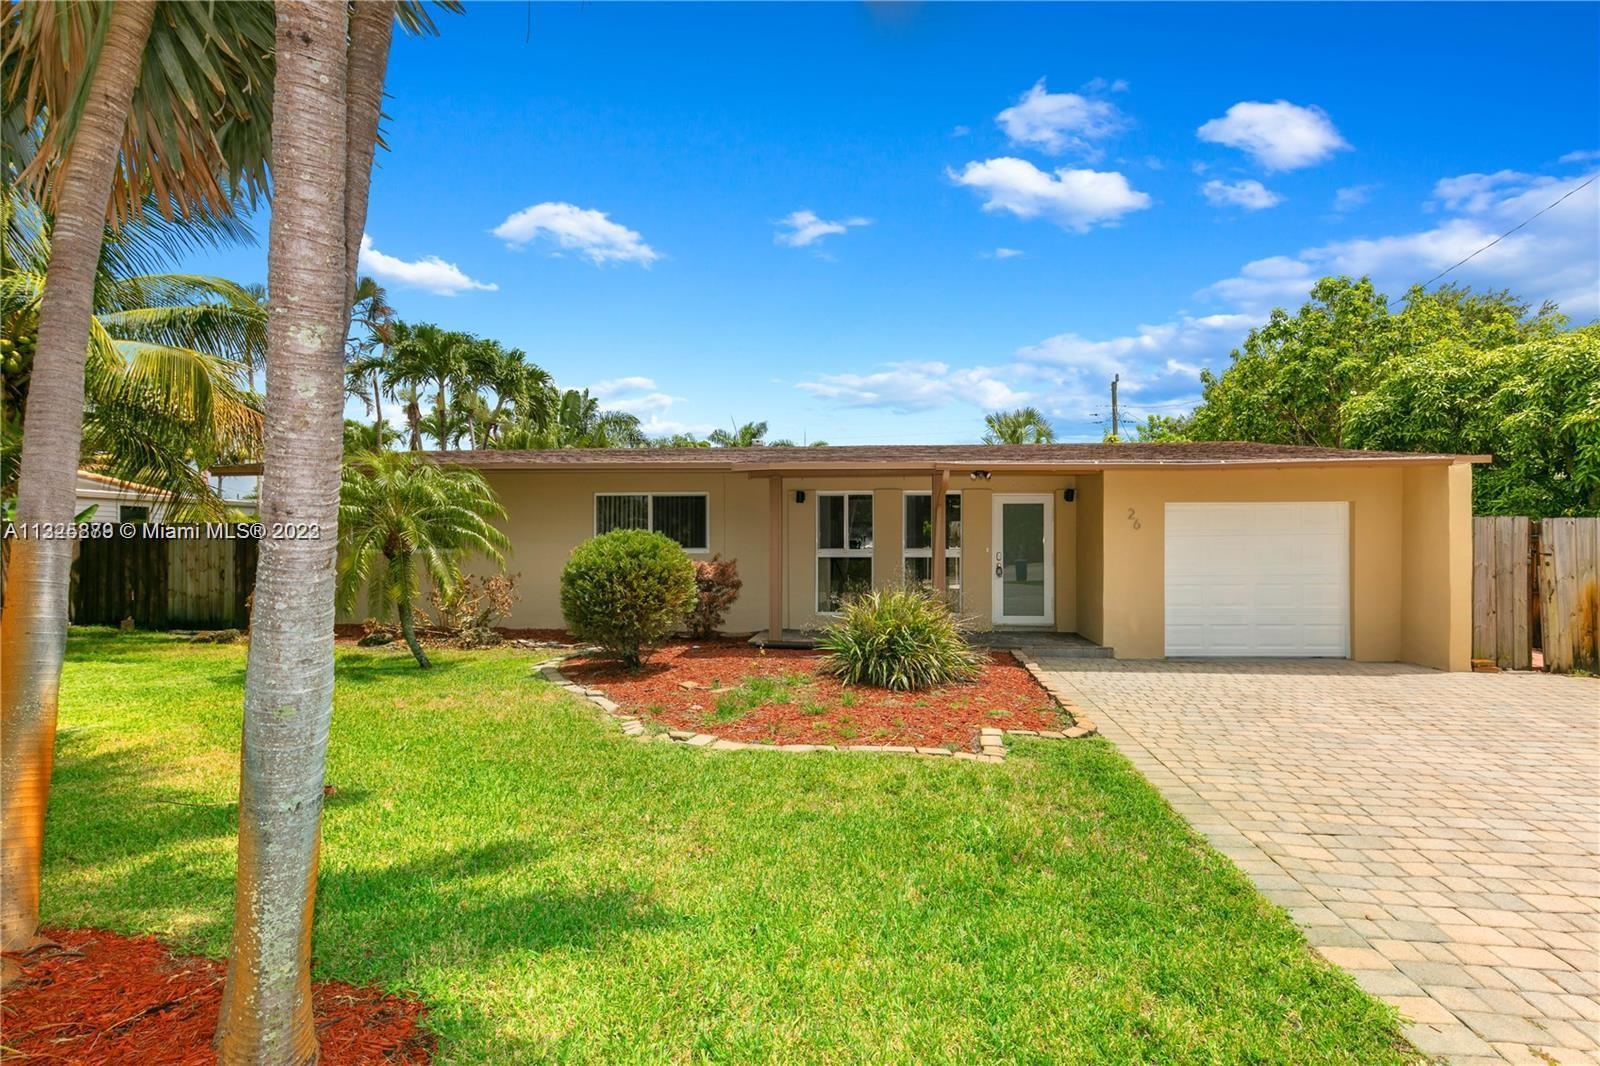 Rich with exterior features and close to the beach!  3-bedroom, 2-bathroom rancher, a great opportun